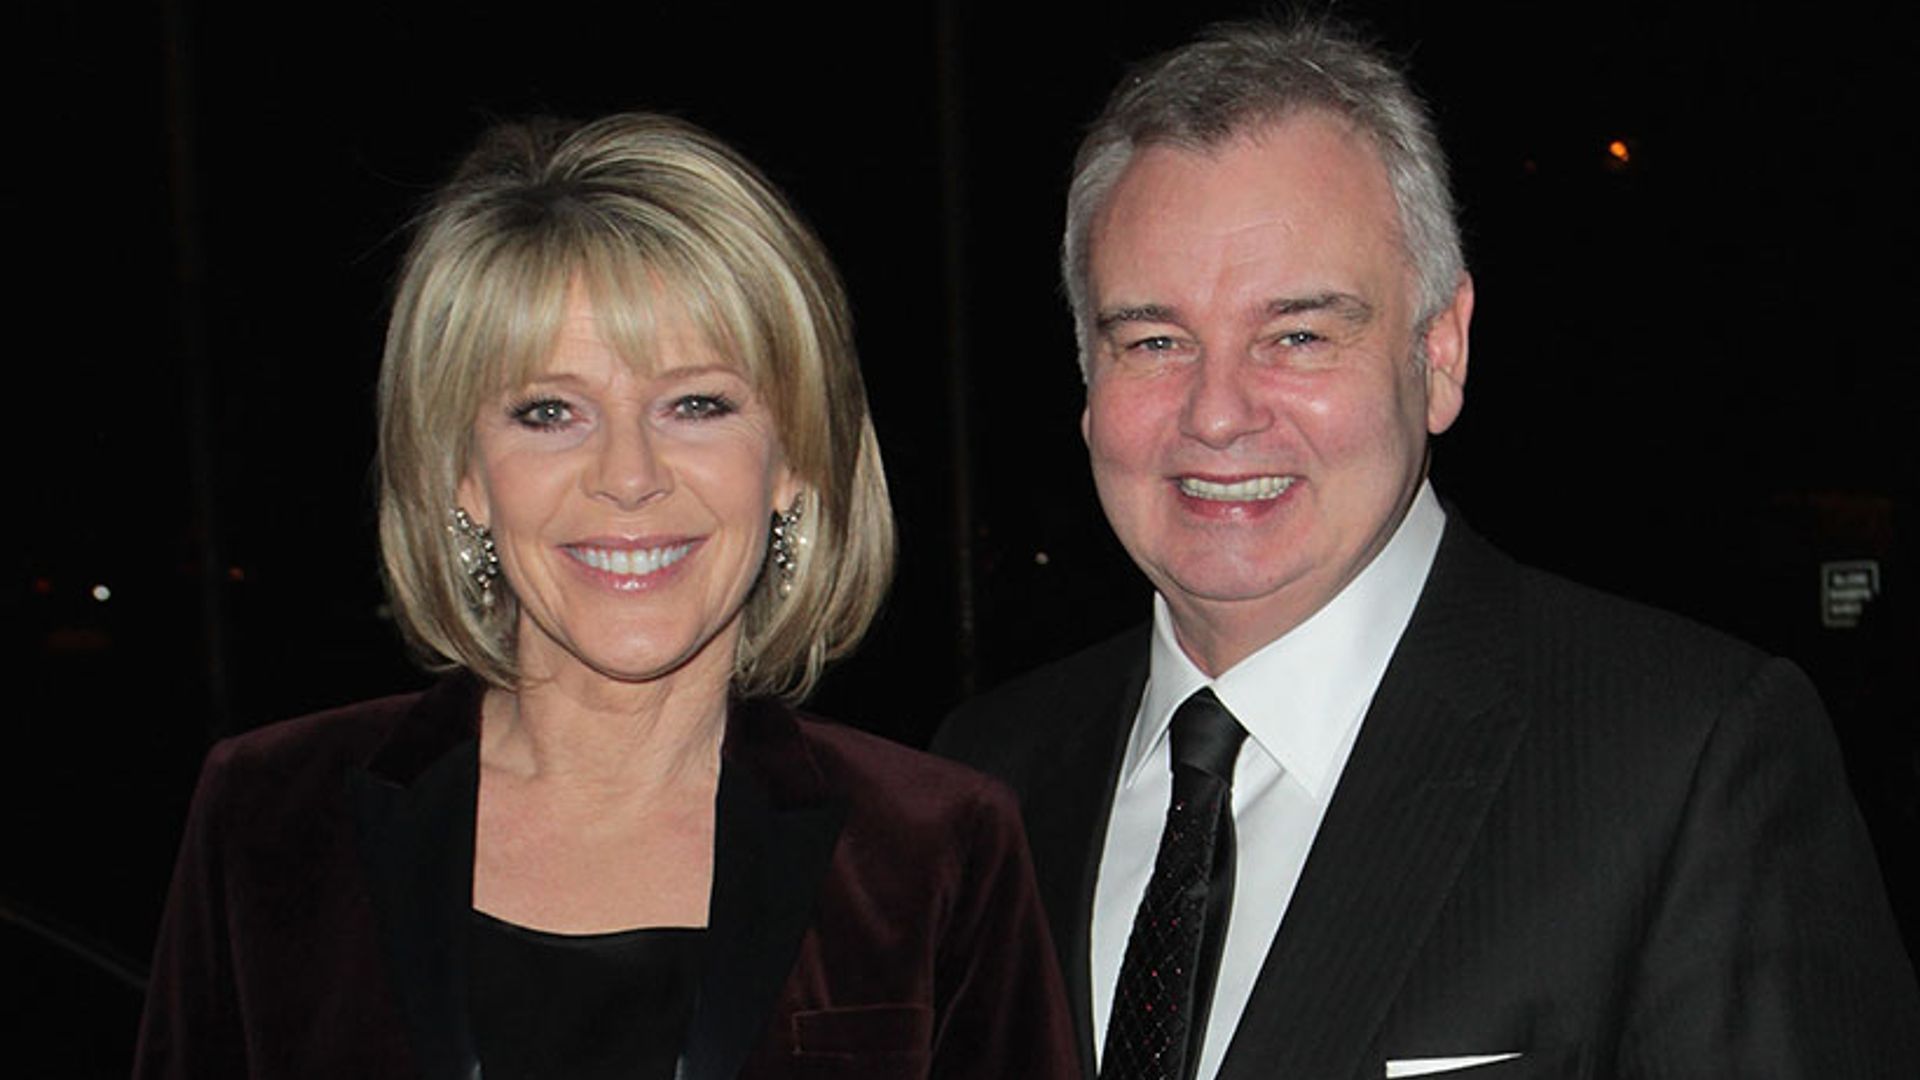 Eamonn Holmes shares romantic snap with Ruth Langsford - and it's identical to the Camerons' anniversary picture